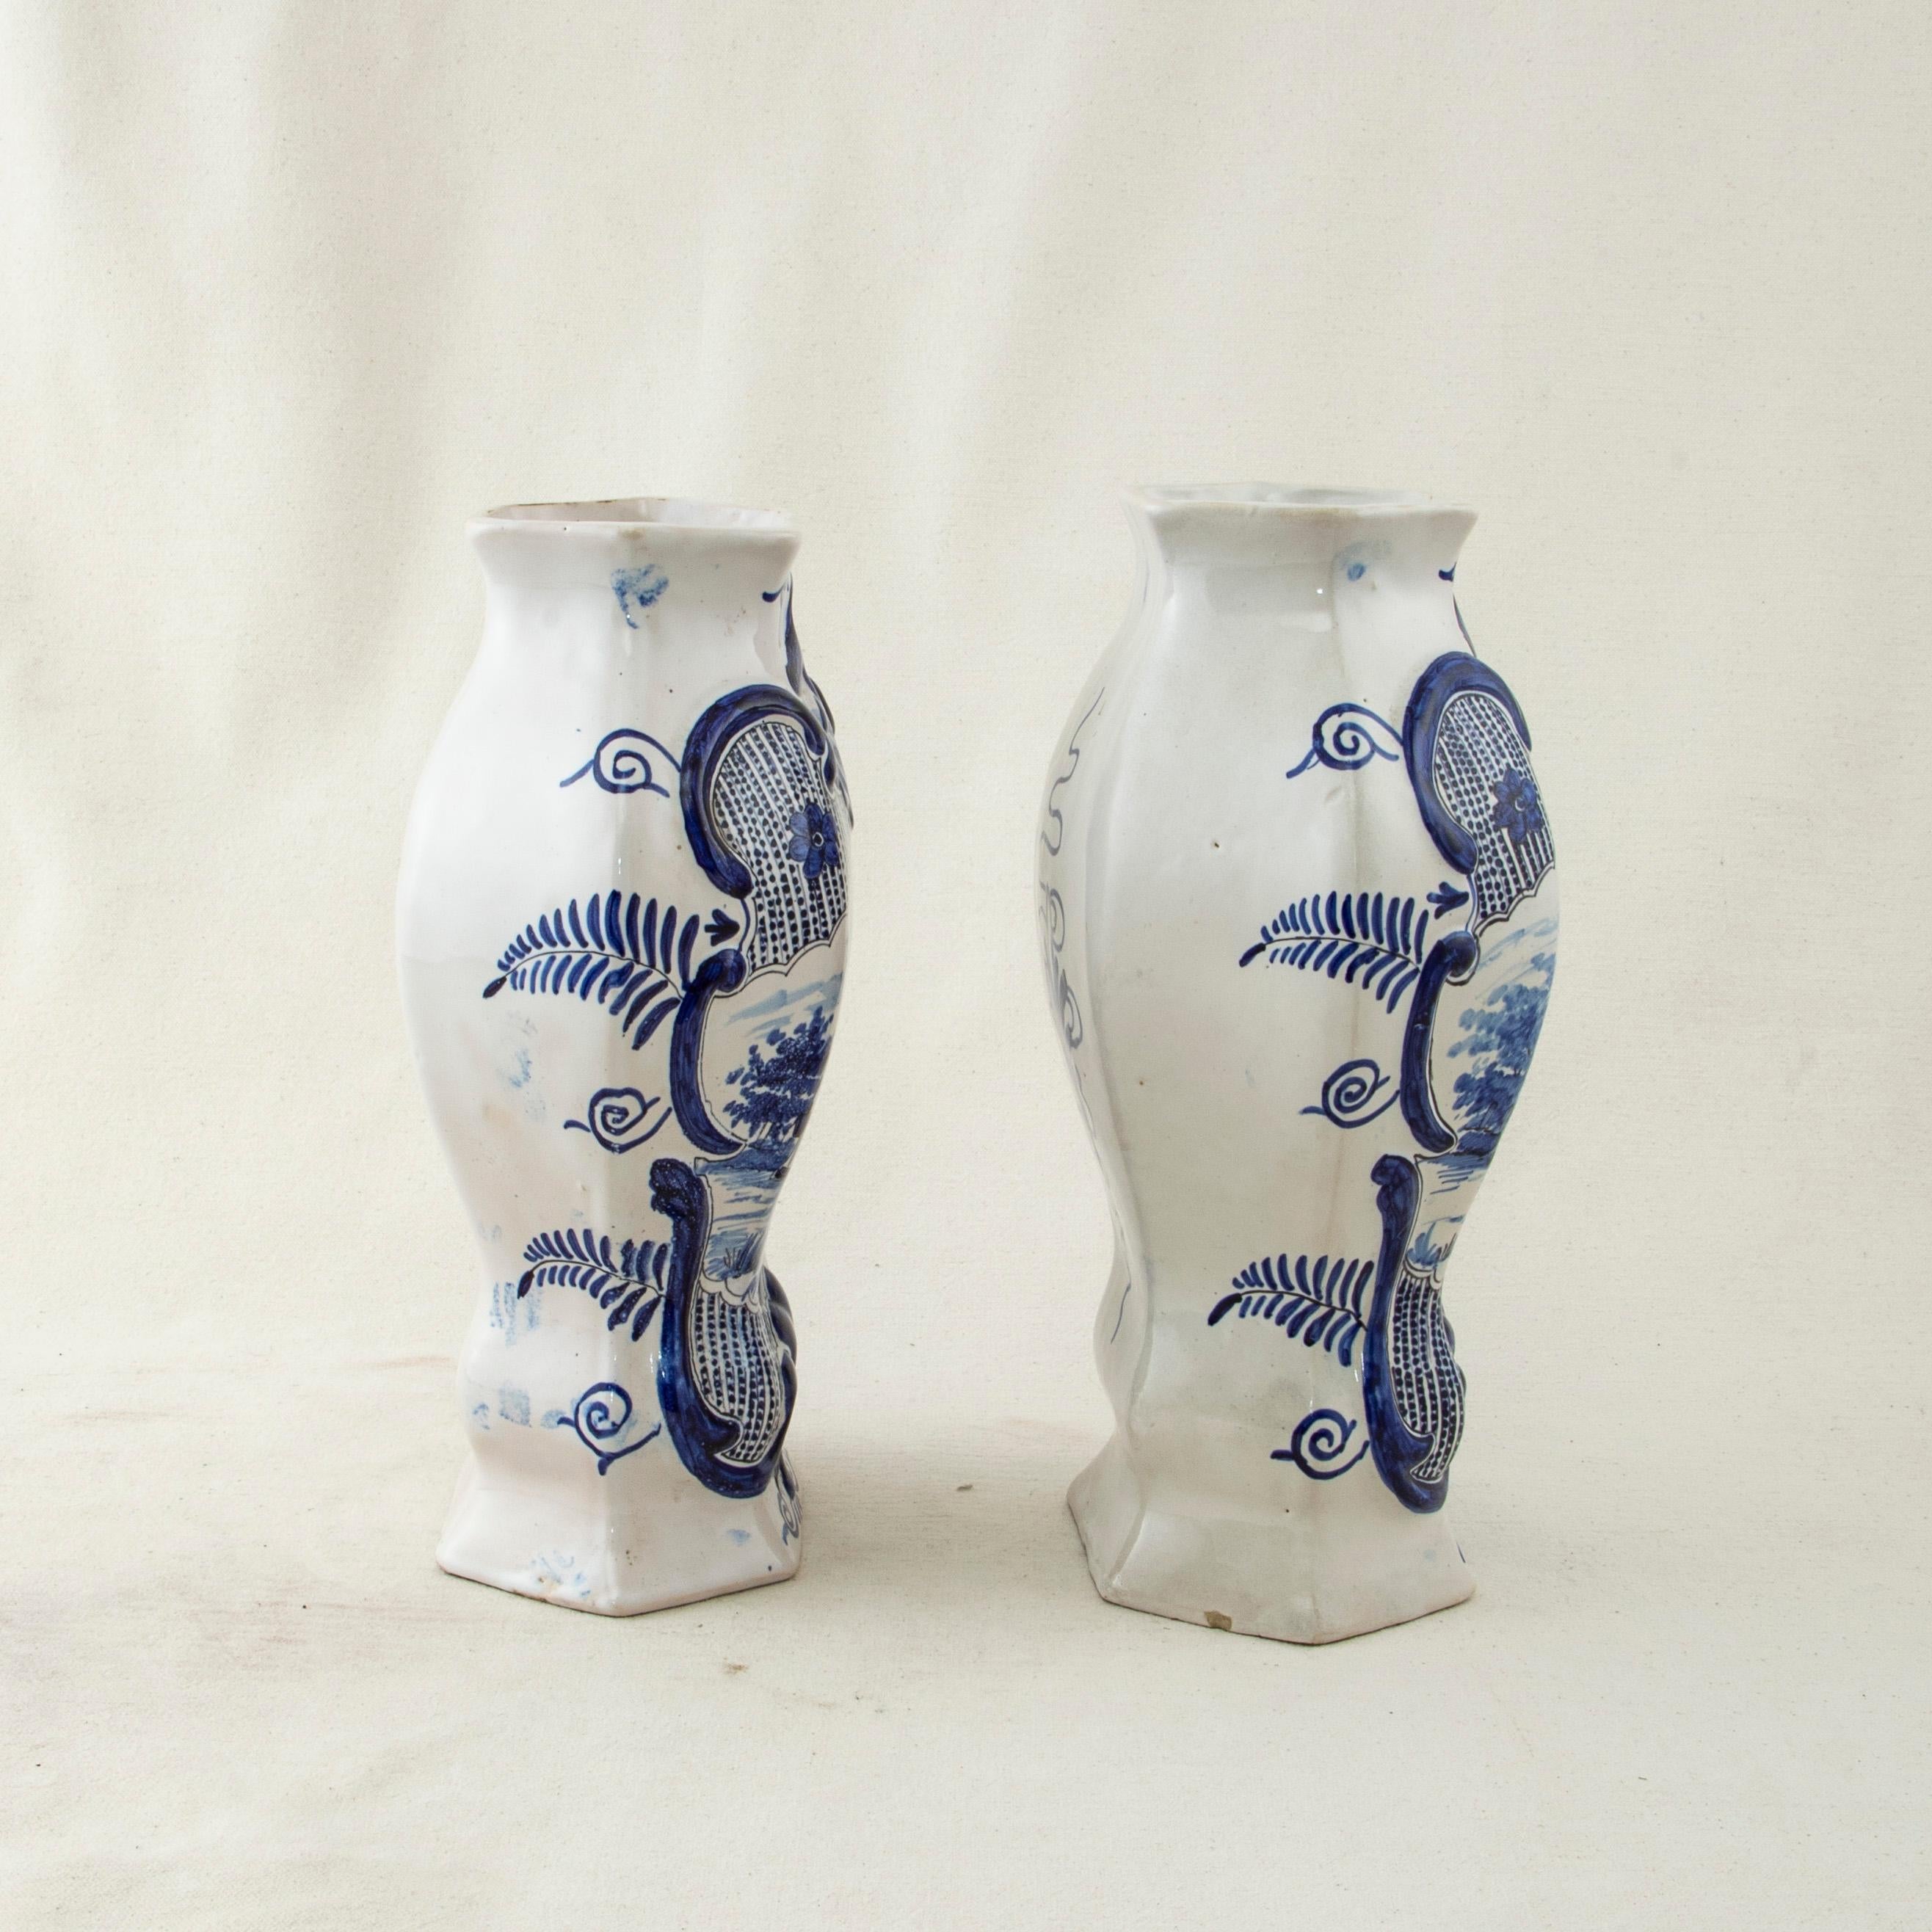 Pair of Late 19th Century Hand-Painted Blue and White Porcelain Delft Vases 1